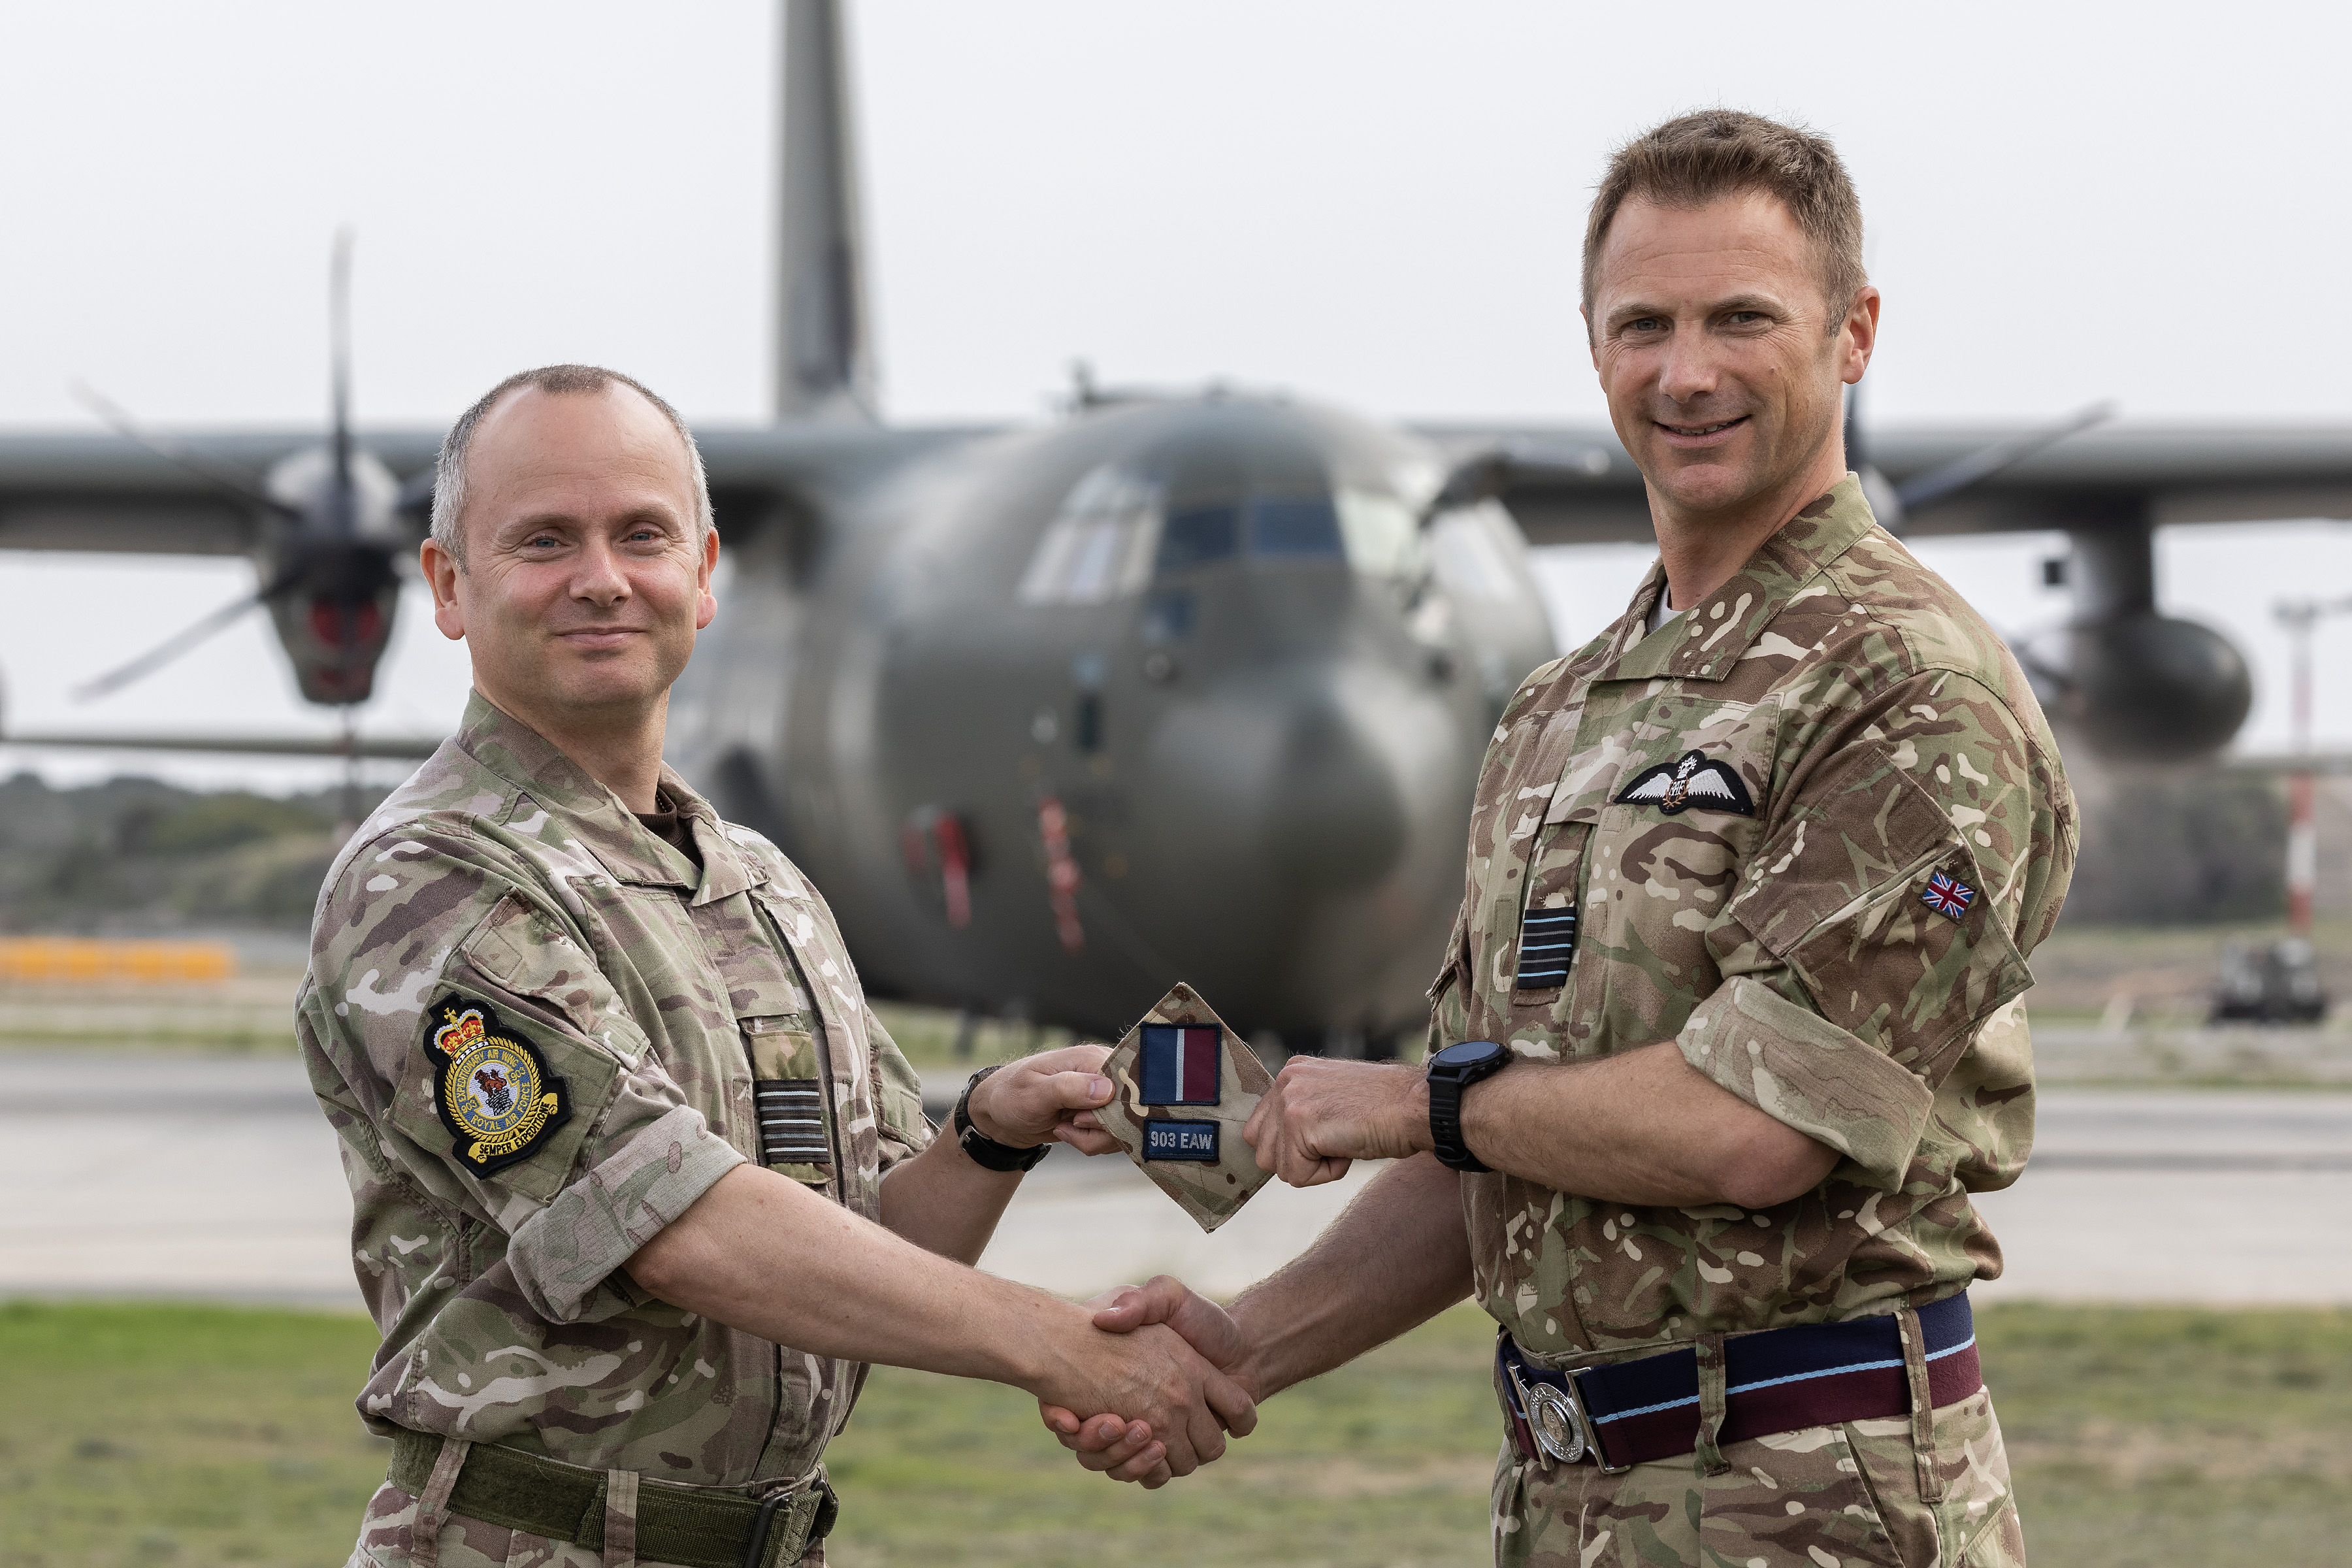 Image shows RAF aviators shaking hands and holding Expeditionary Air Wing badge, in front of an Atlas aircraft.